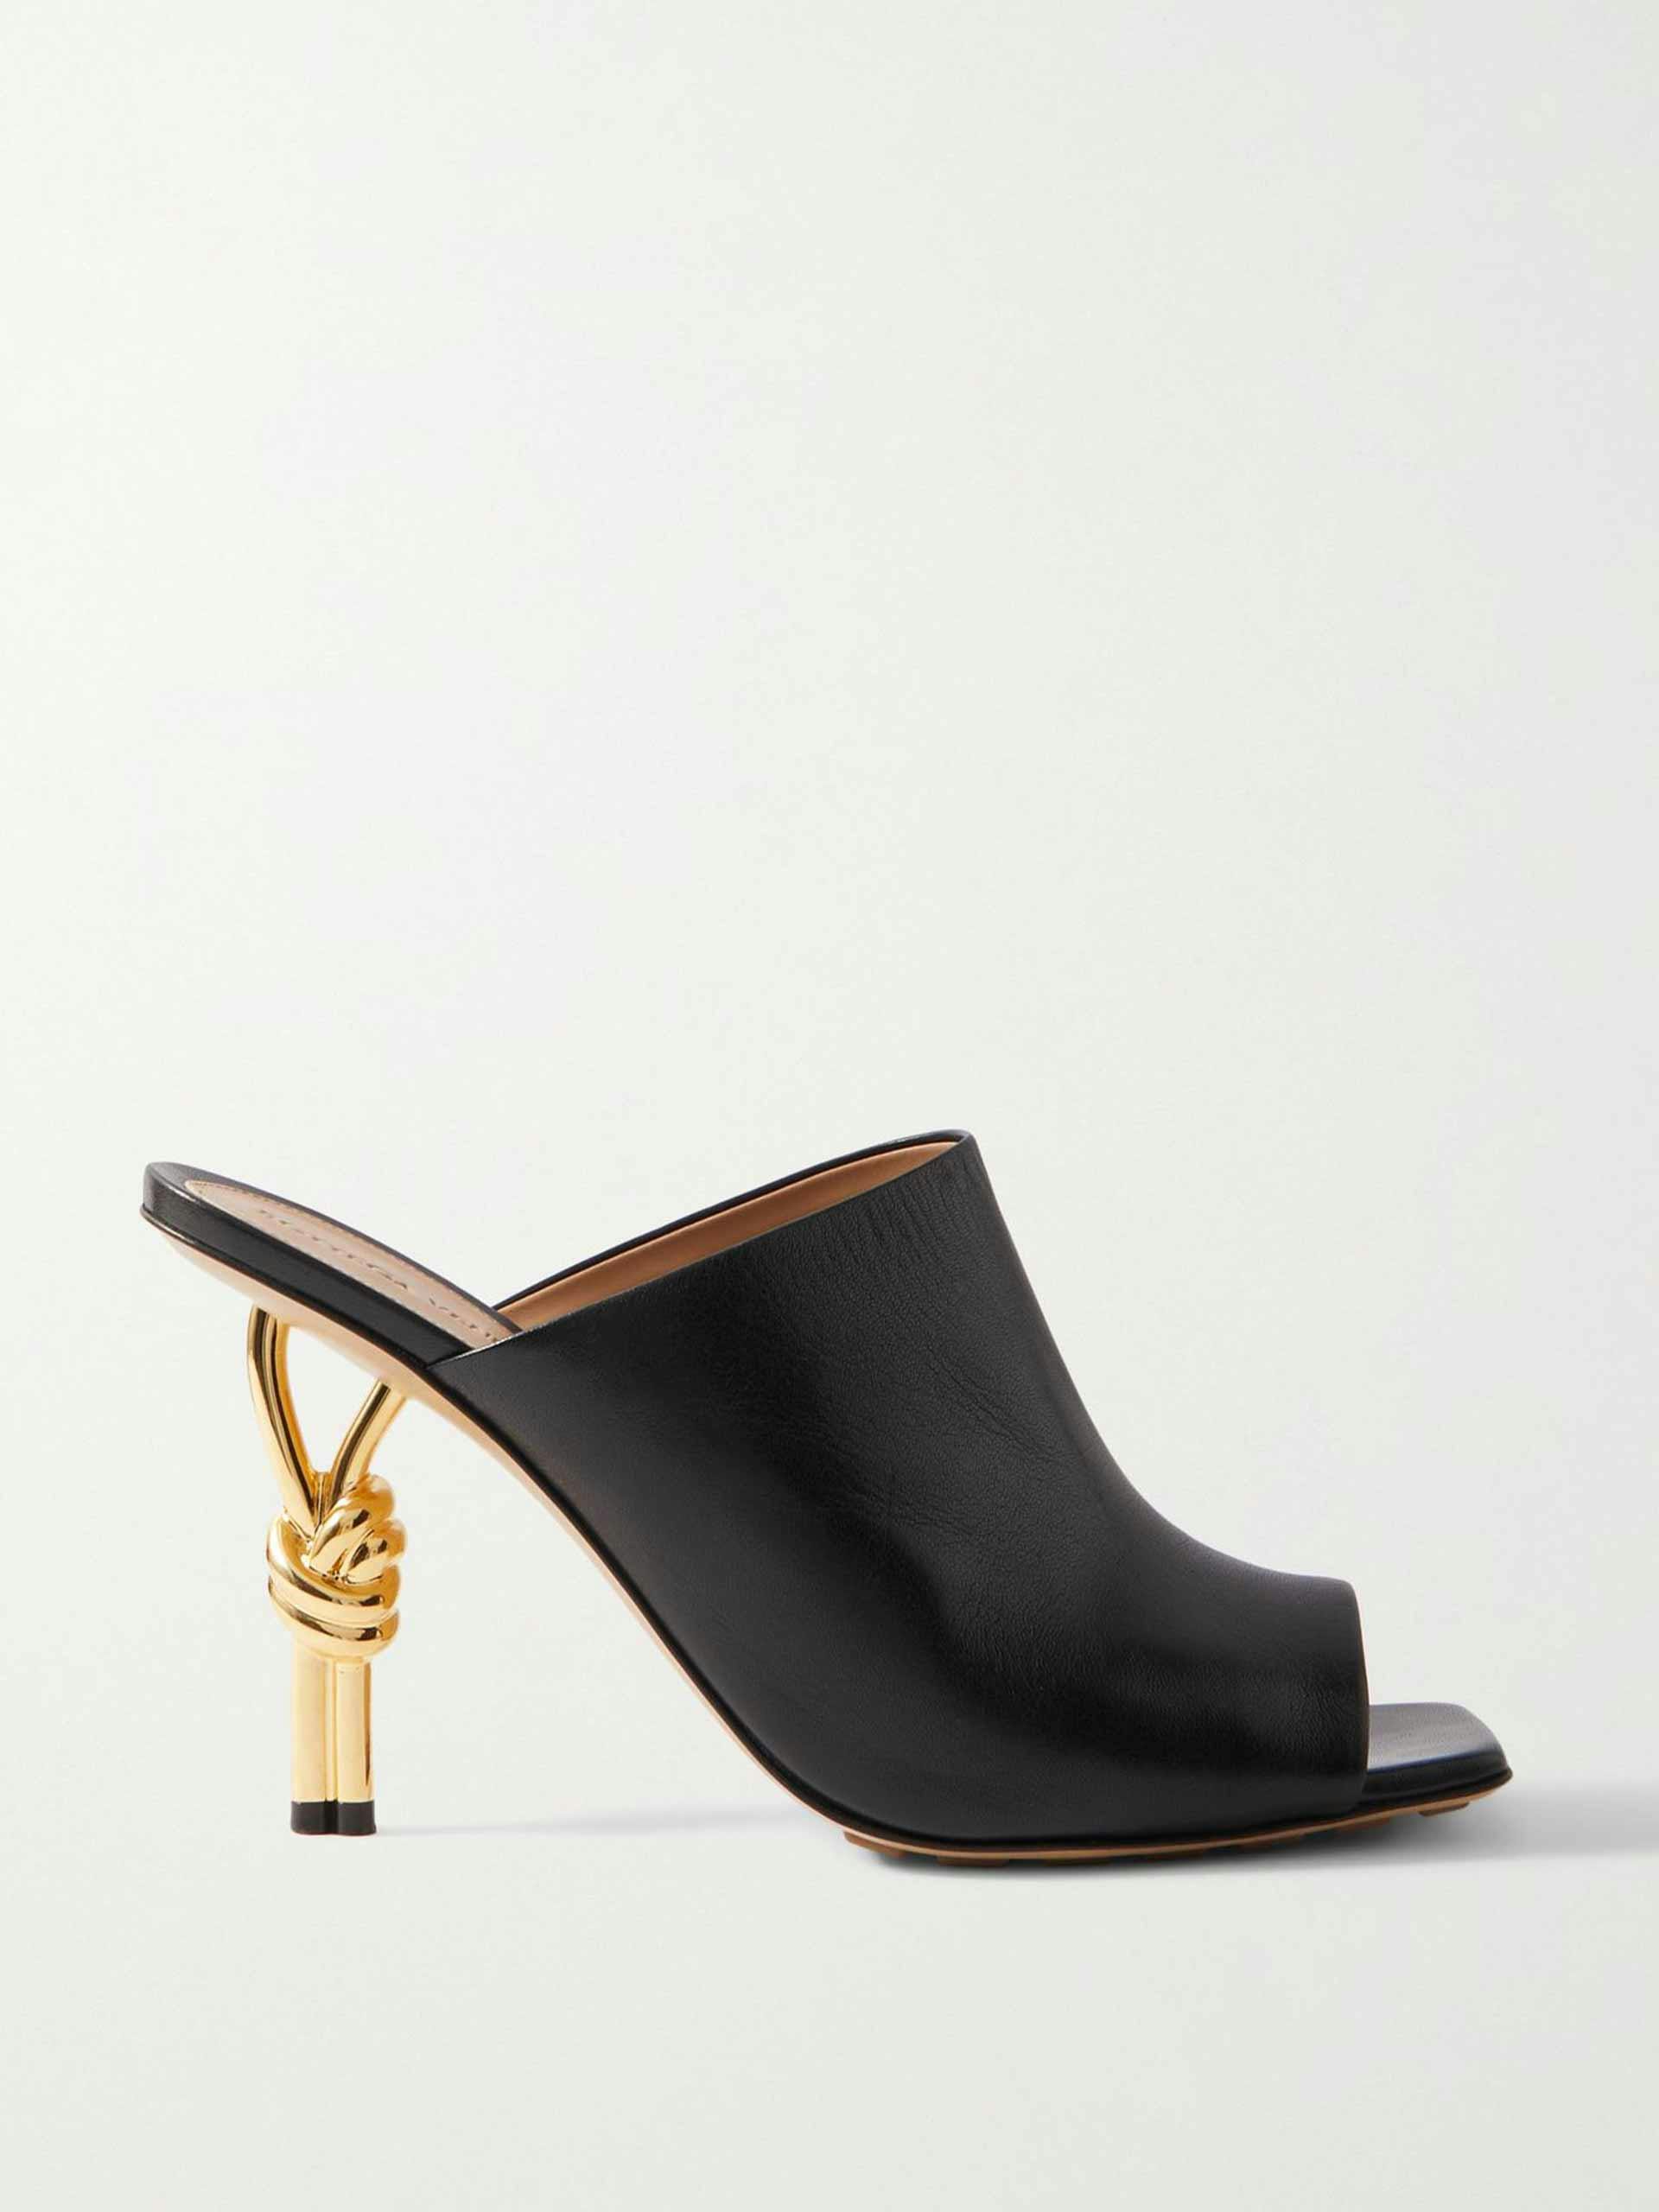 Black and gold twisted heels